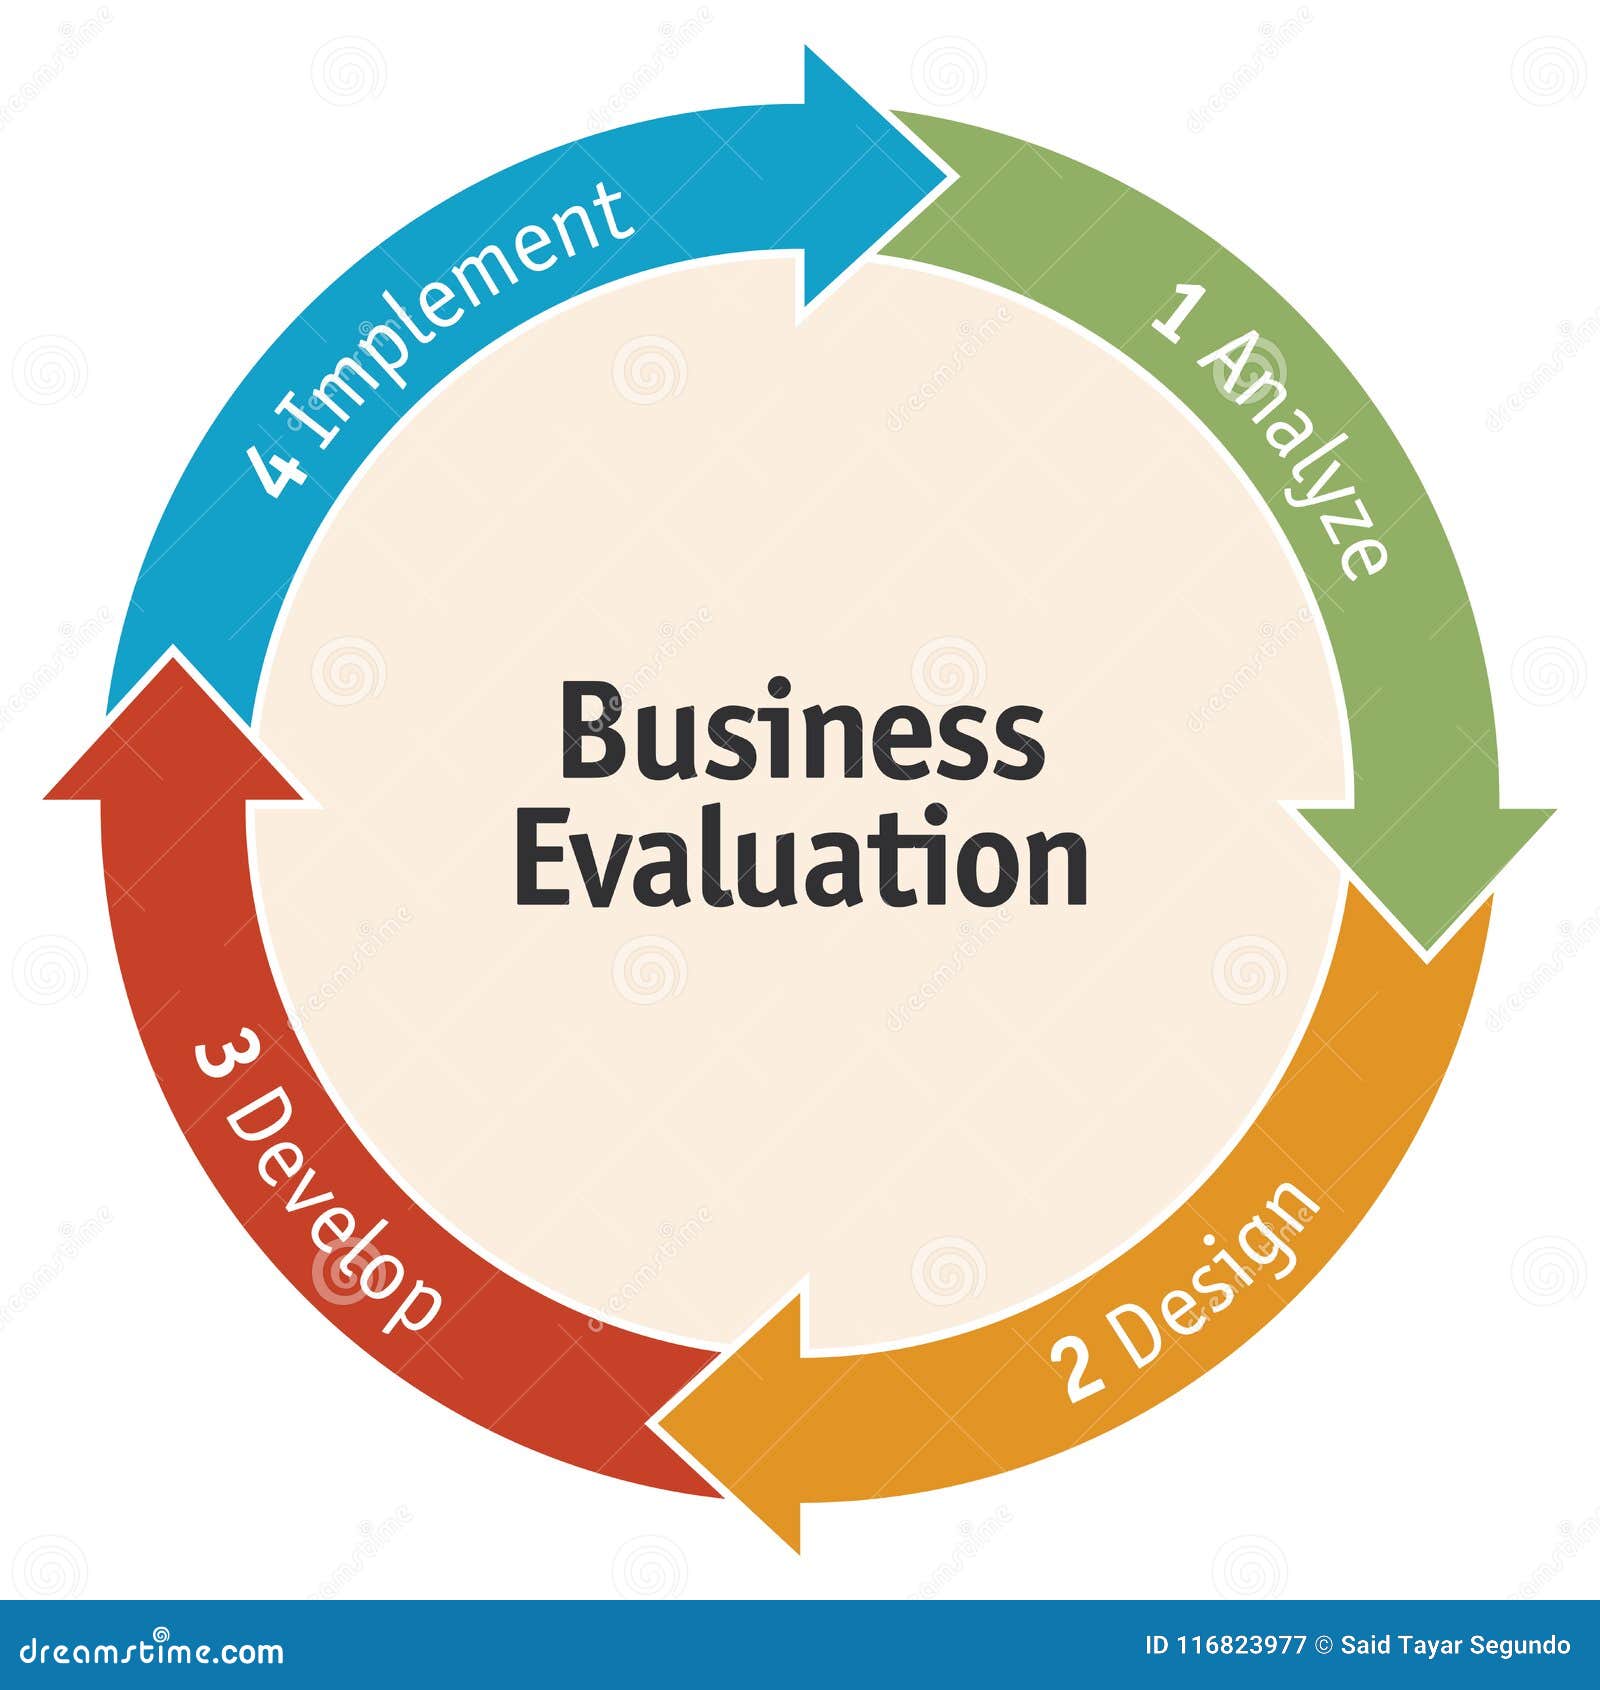 the evaluation process of a business plan allows